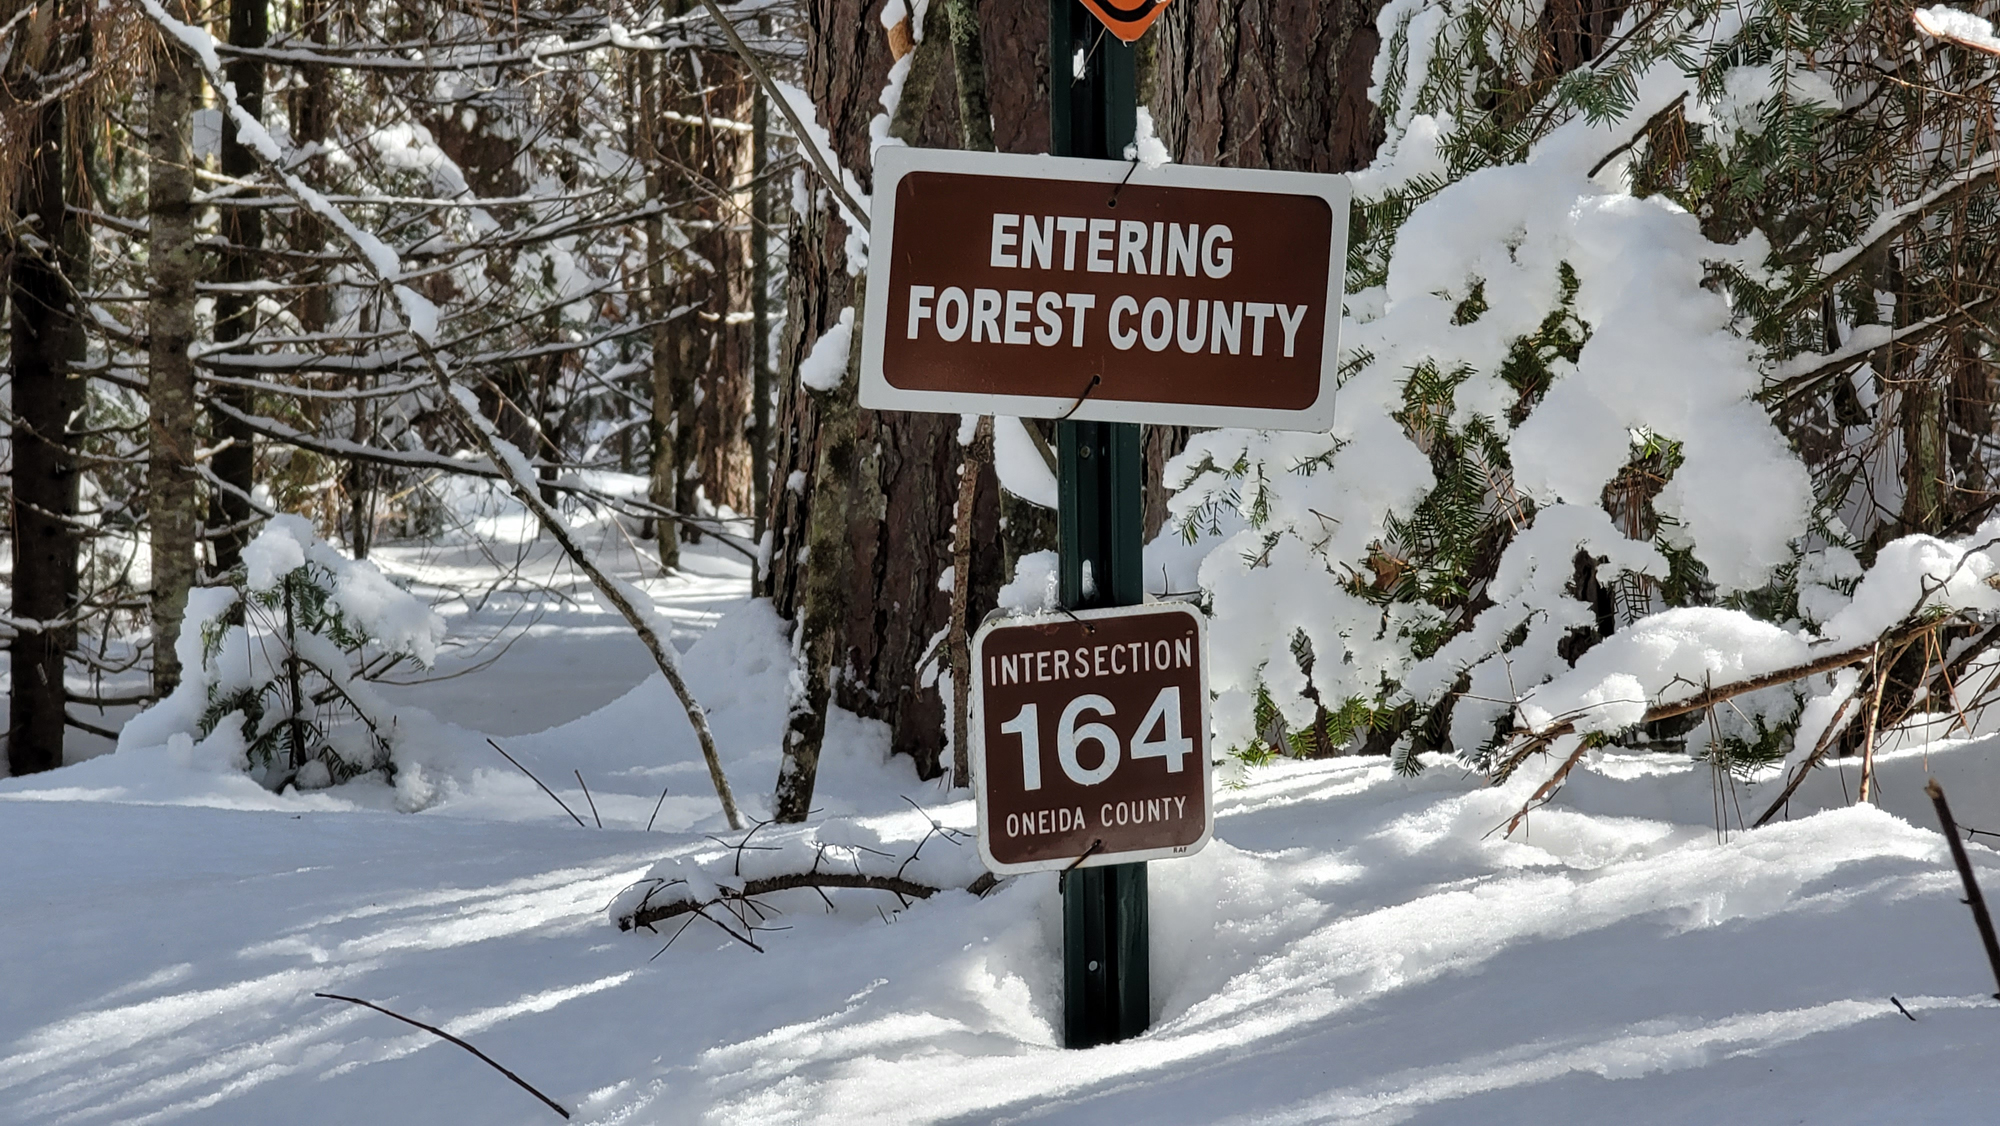 Kimball Creek trail entering Forest county.